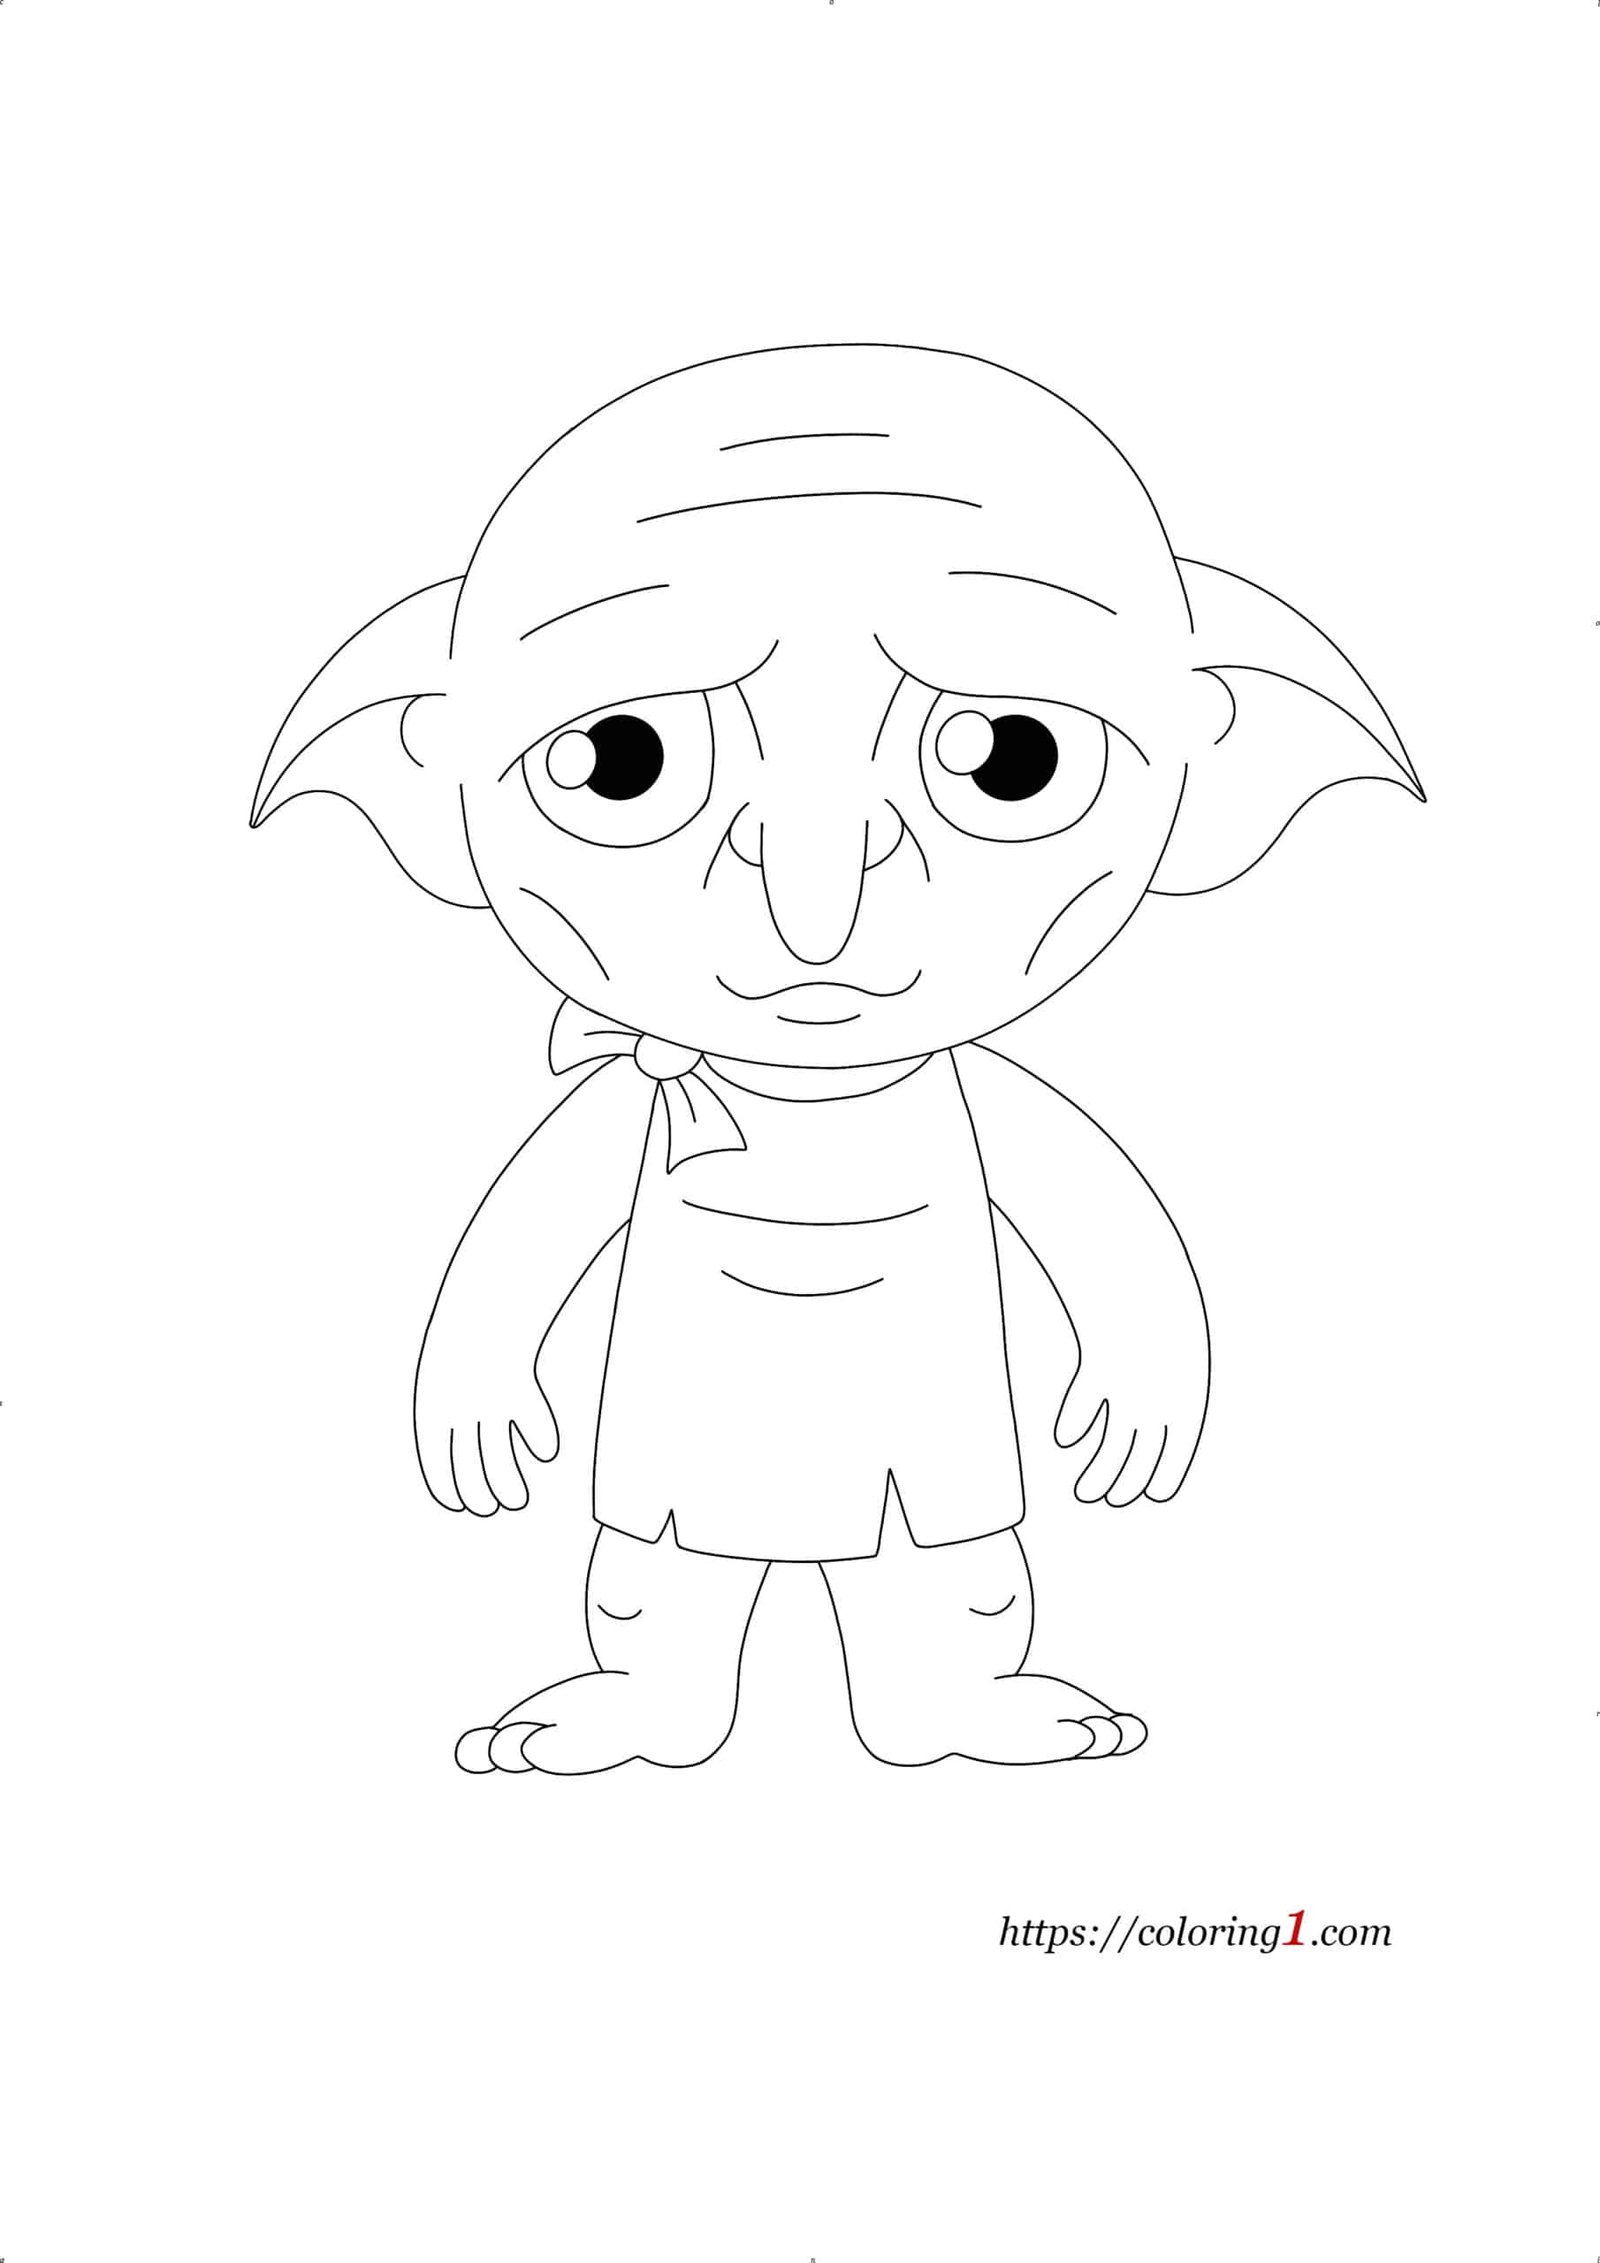 Harry Potter Dobby coloring page